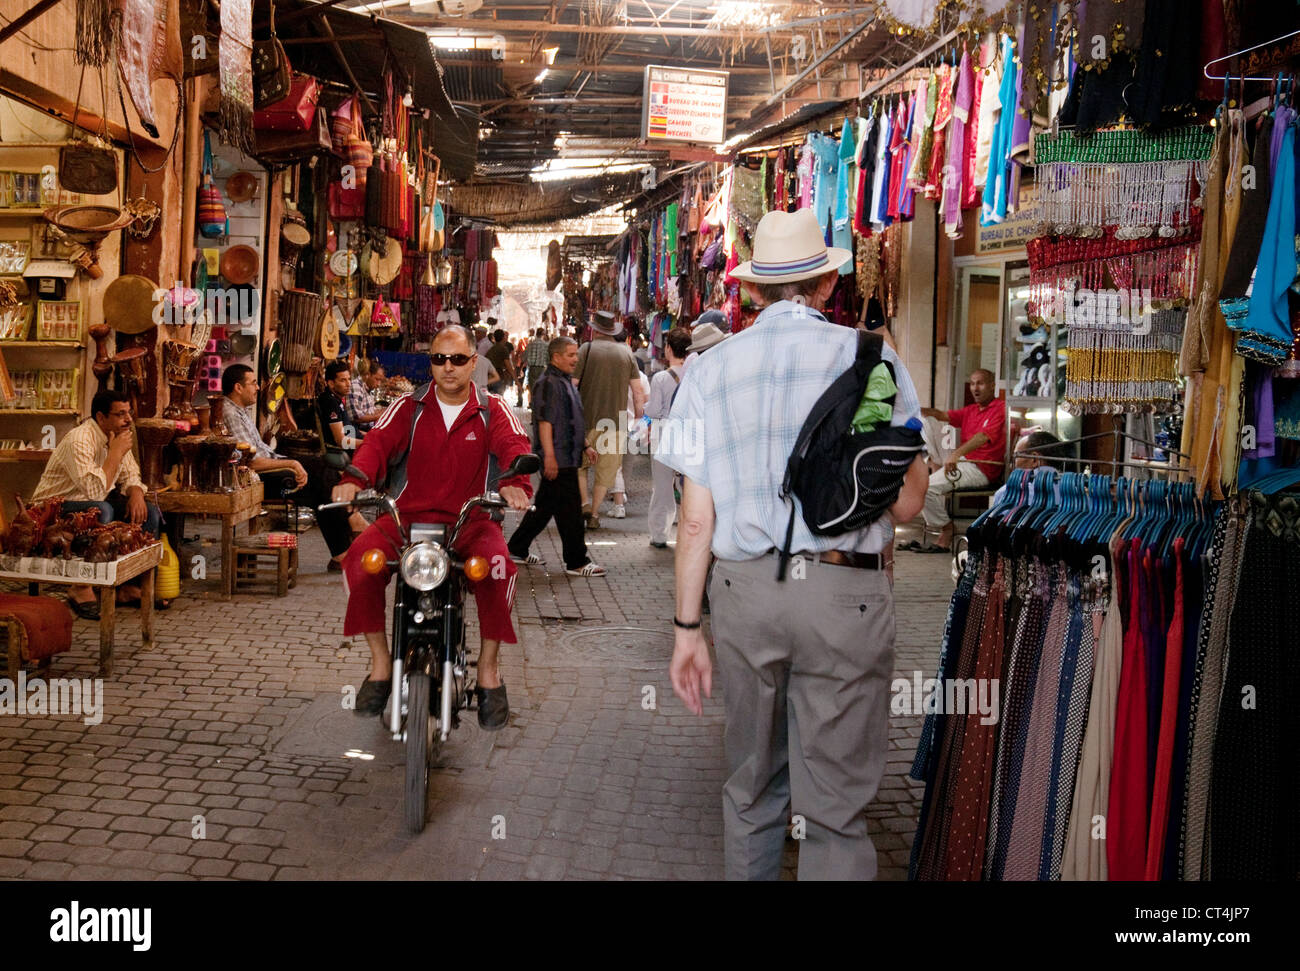 Tourists and locals in the Souk, Marrakech, morocco Stock Photo